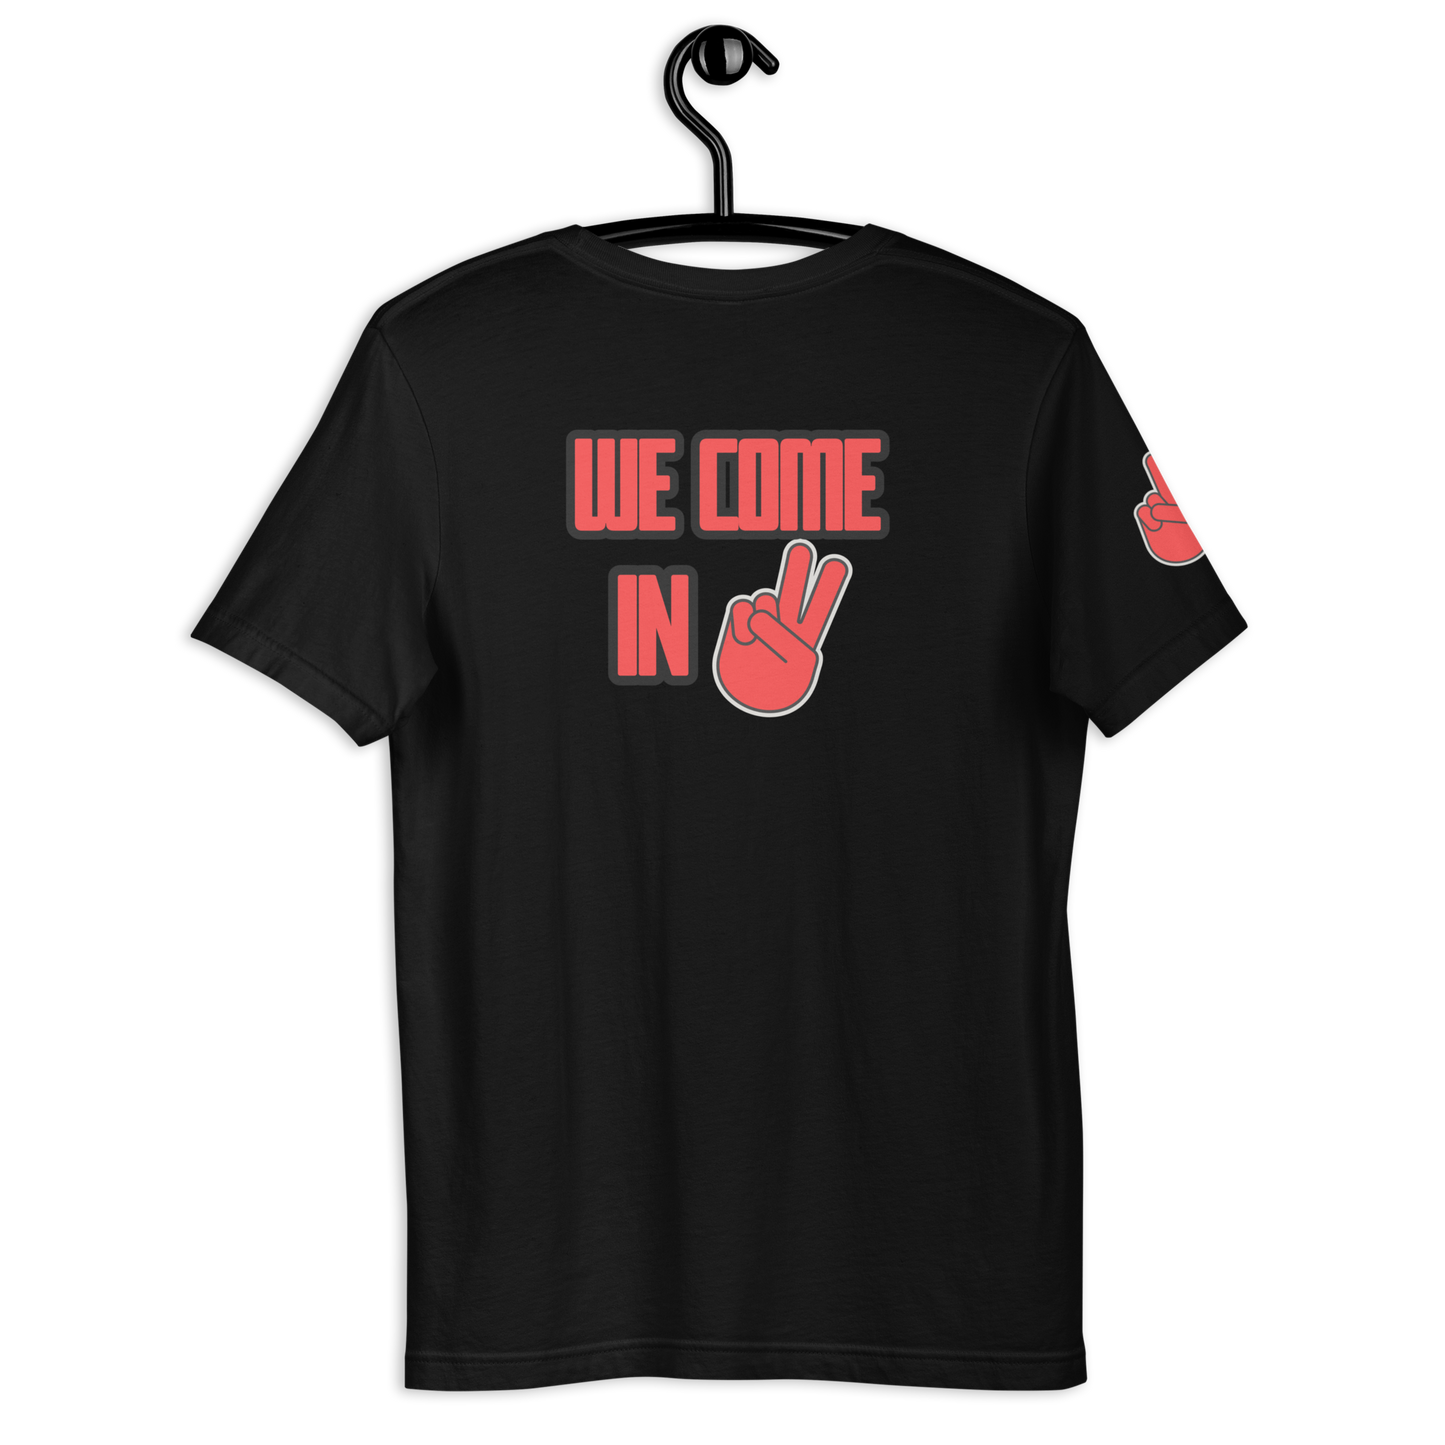 We Come In peace T-shirt